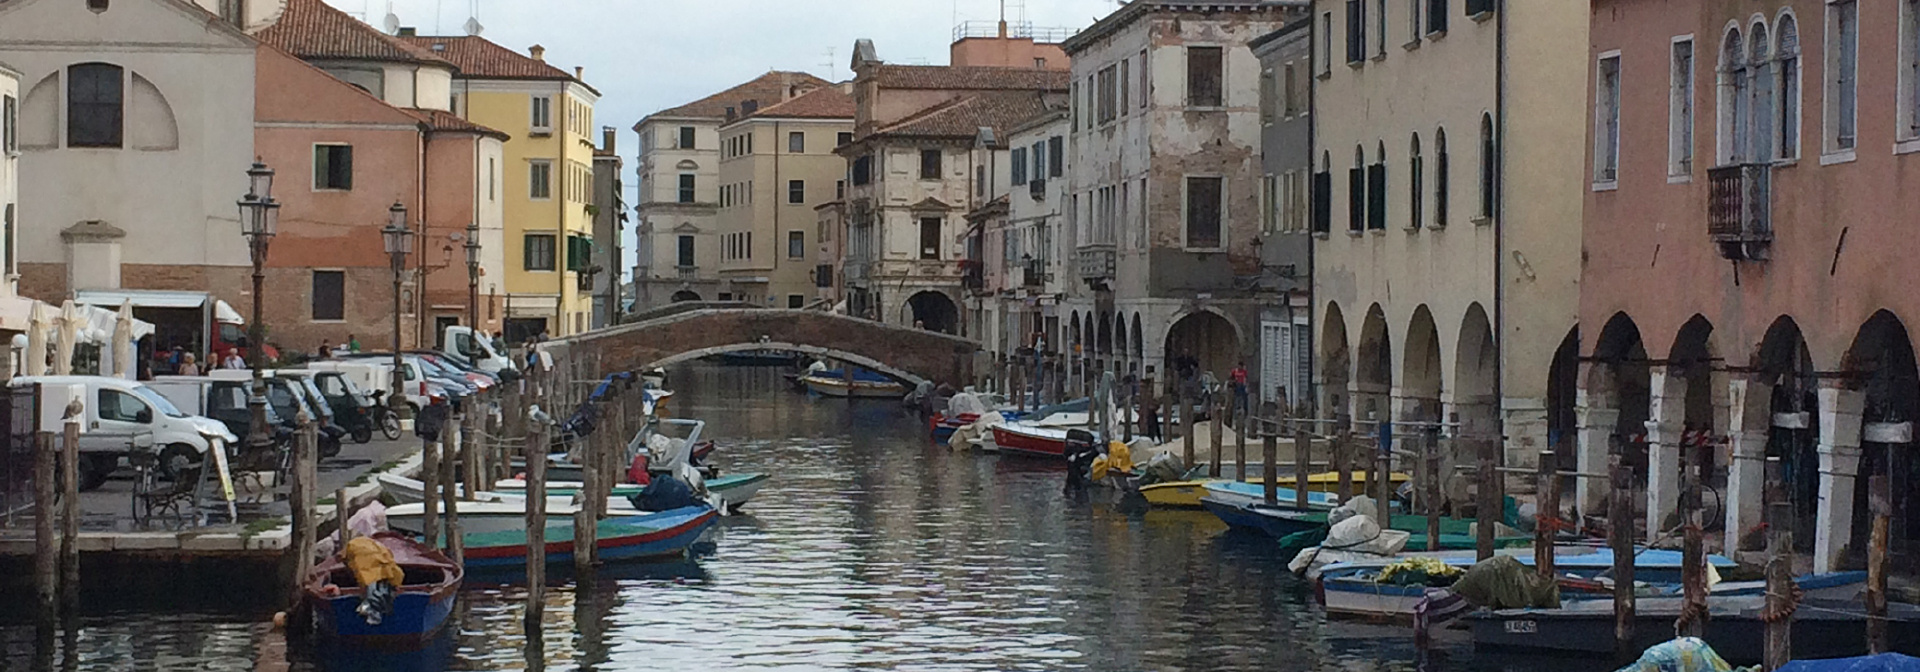 Italy: Bike and Barge Tour - Venice to Mantua